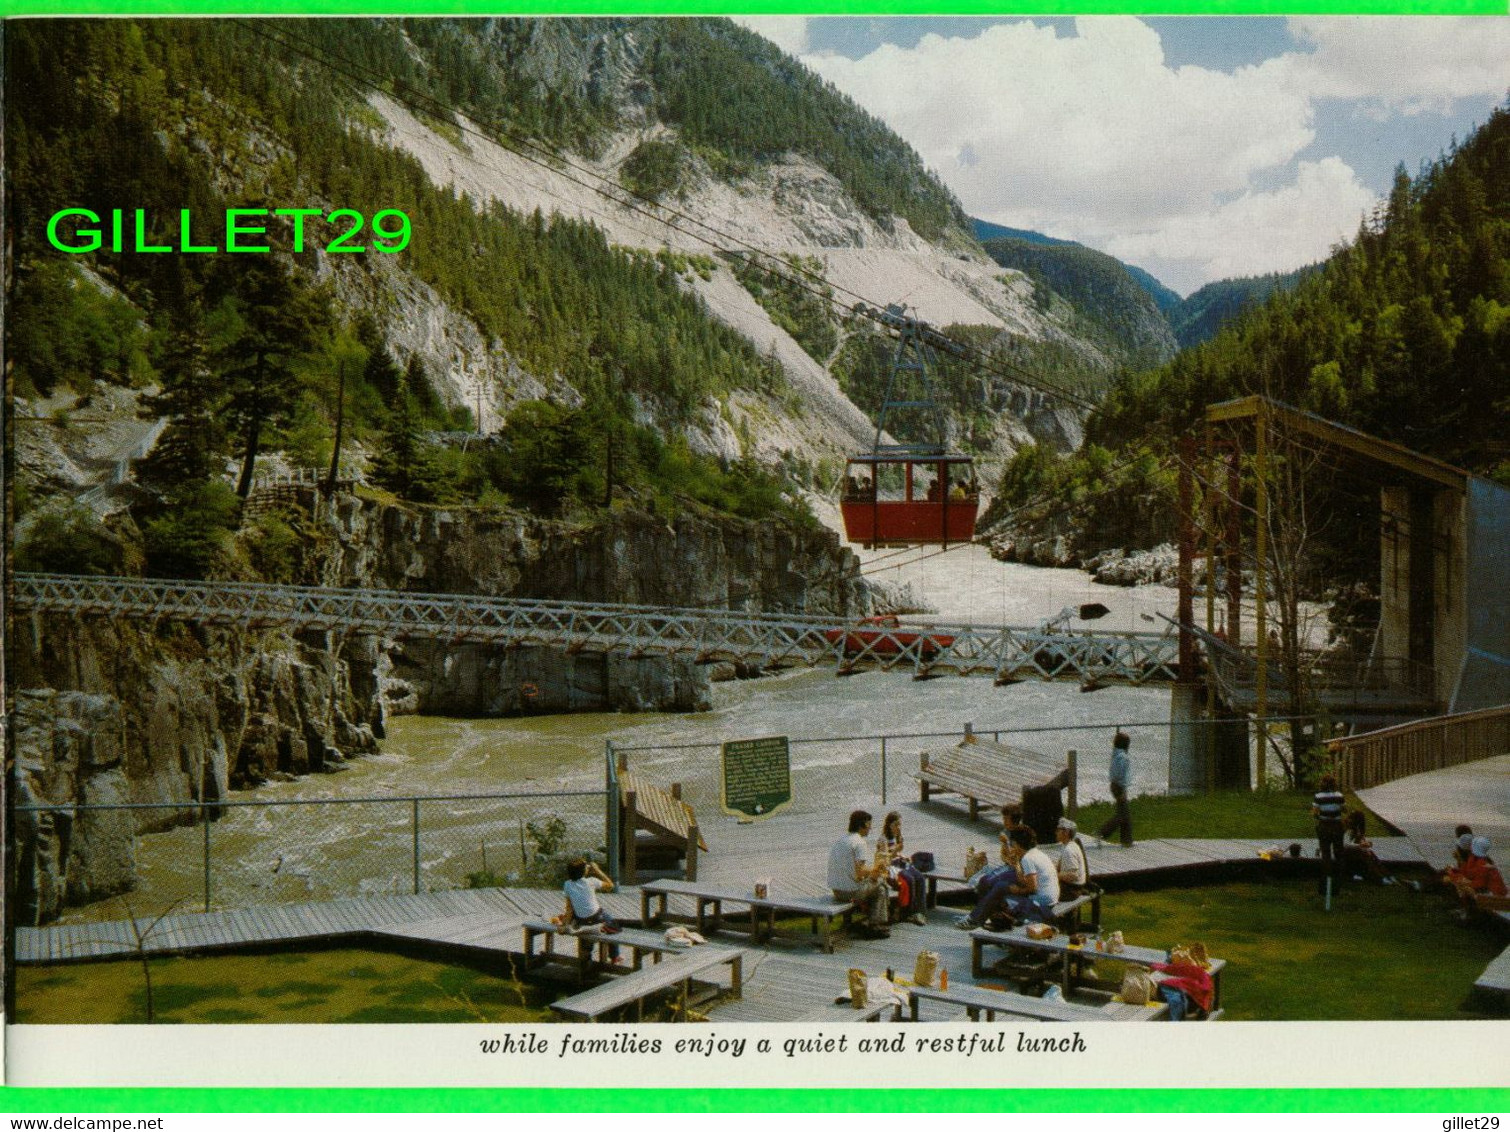 A SOUVENUR ALBUM OF HELL'S GATE AIRTRAM, FRASER CANYON, BC IN 1978 - 20 PAGES - - Nordamerika